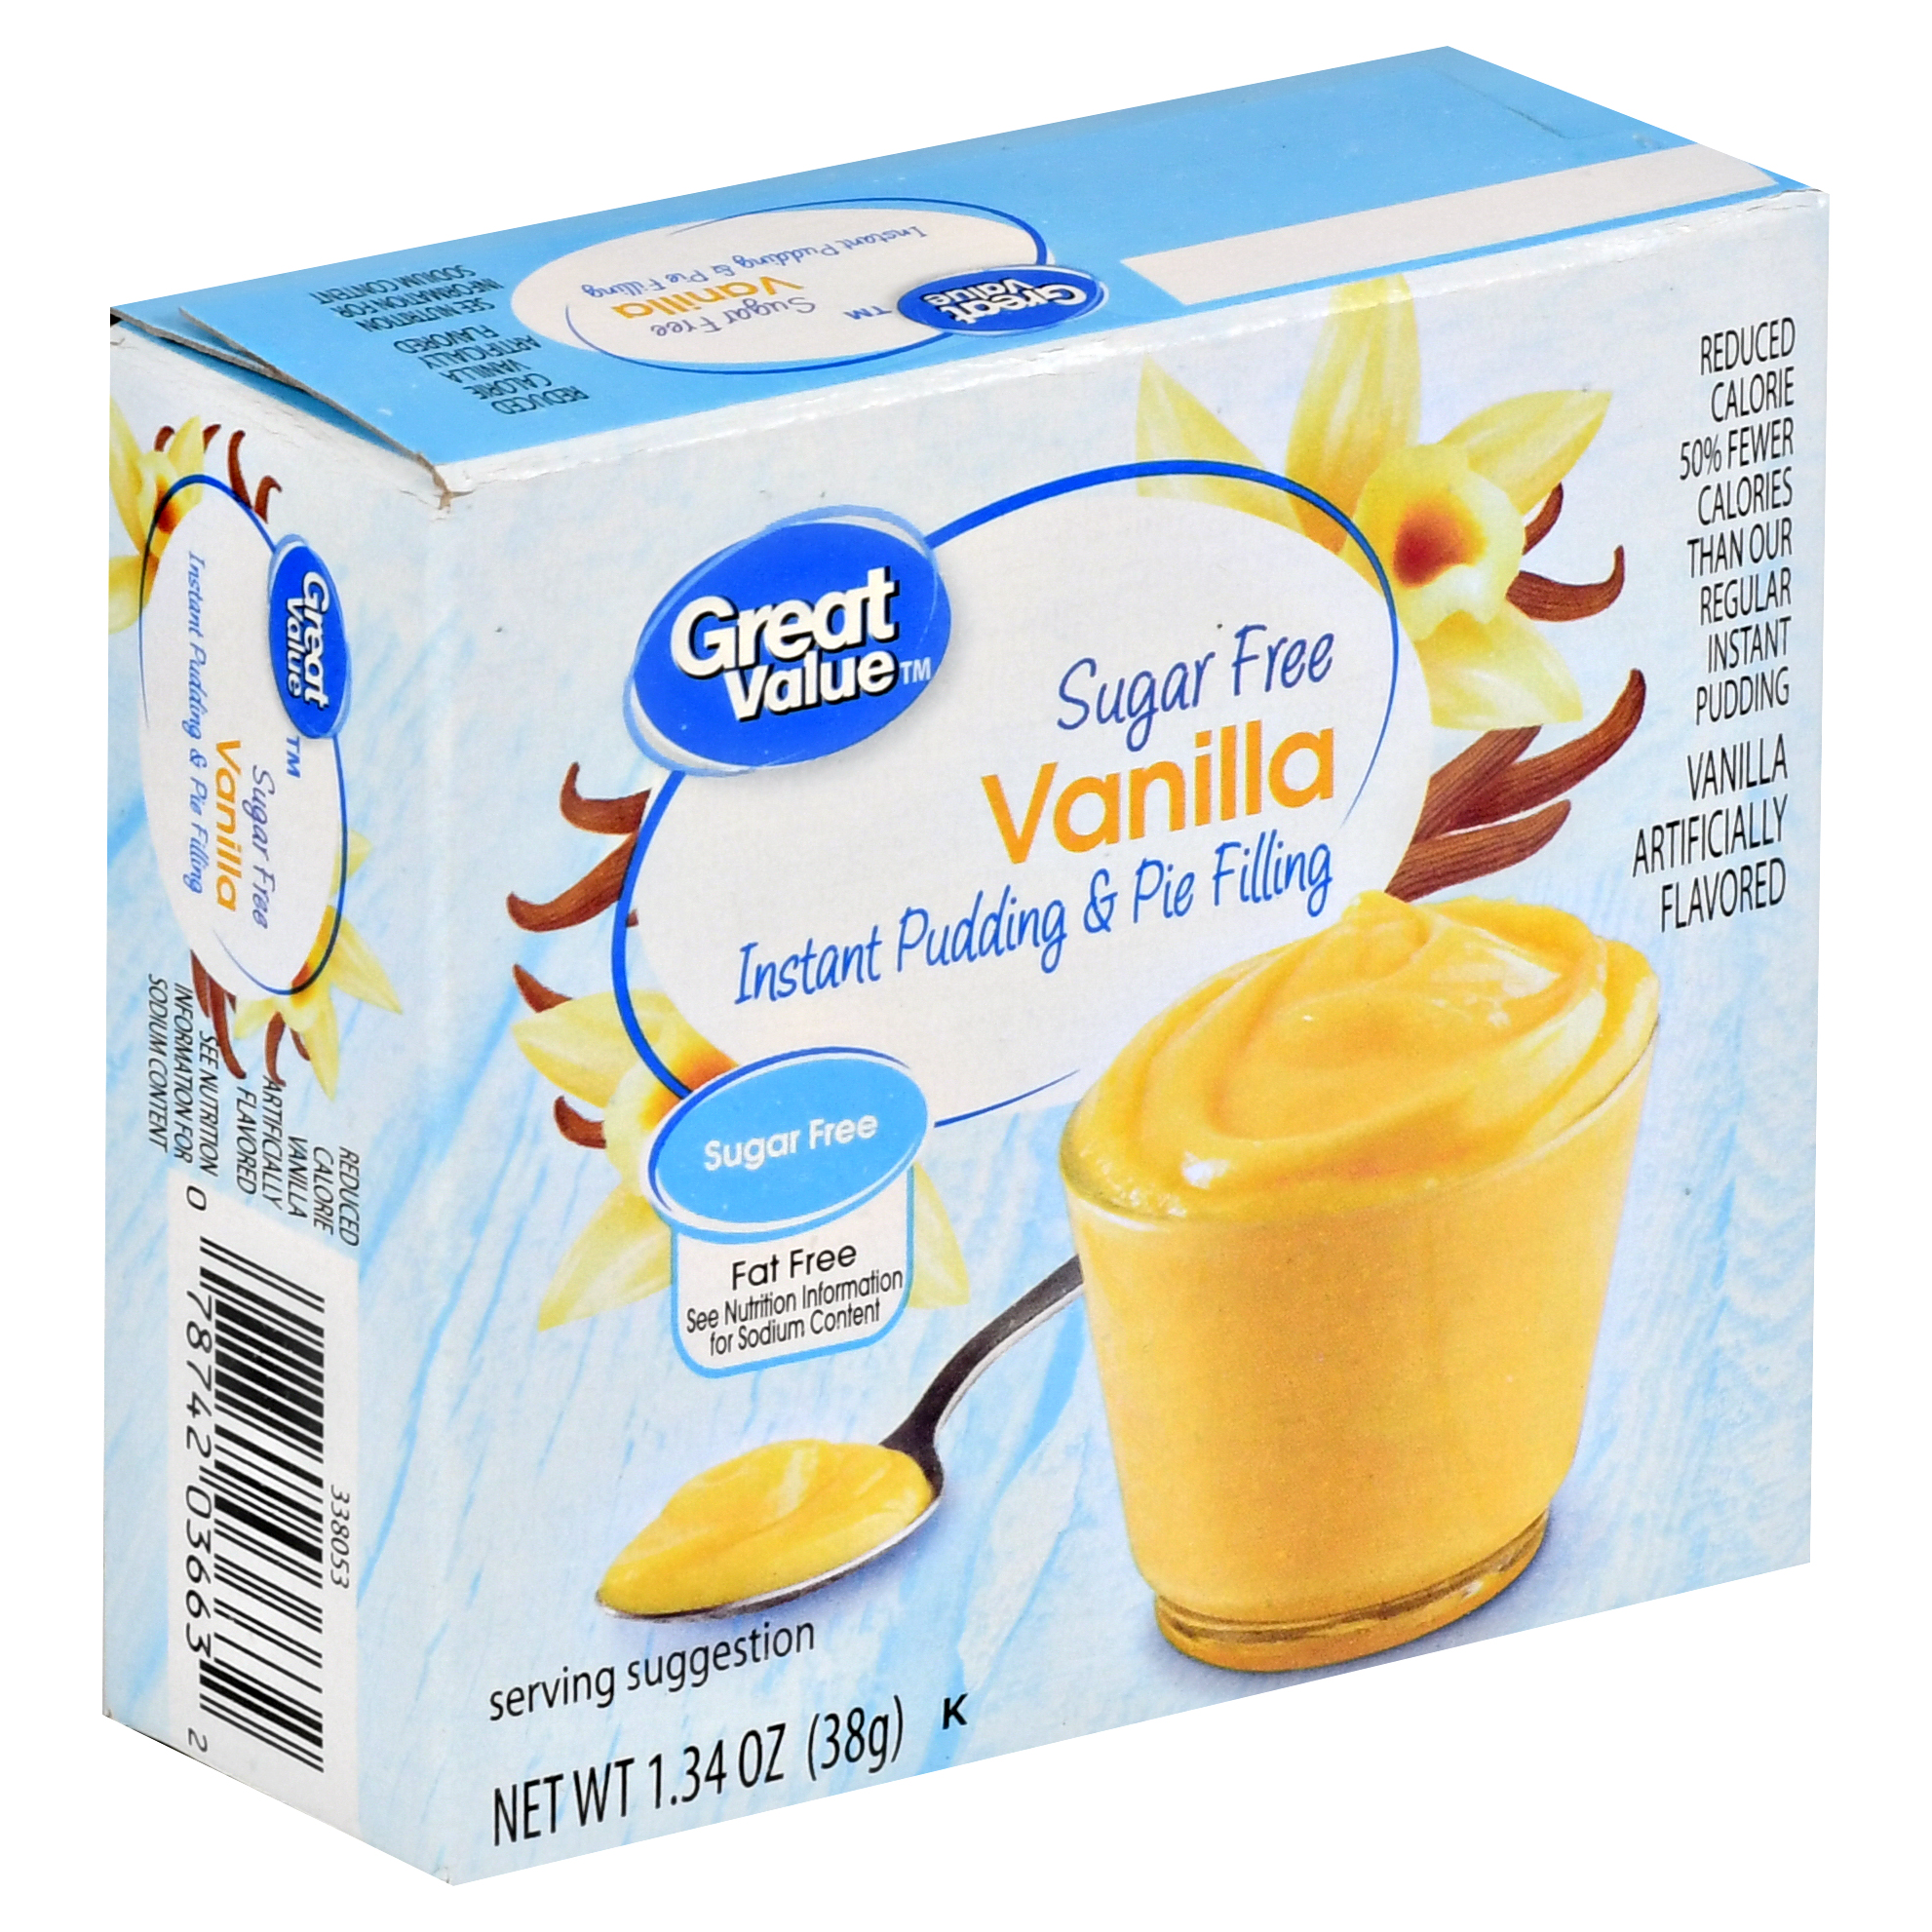 (5 Pack) Great Value Instant Pudding & Pie Filling, Vanilla, Sugar Free, 1.34 Oz